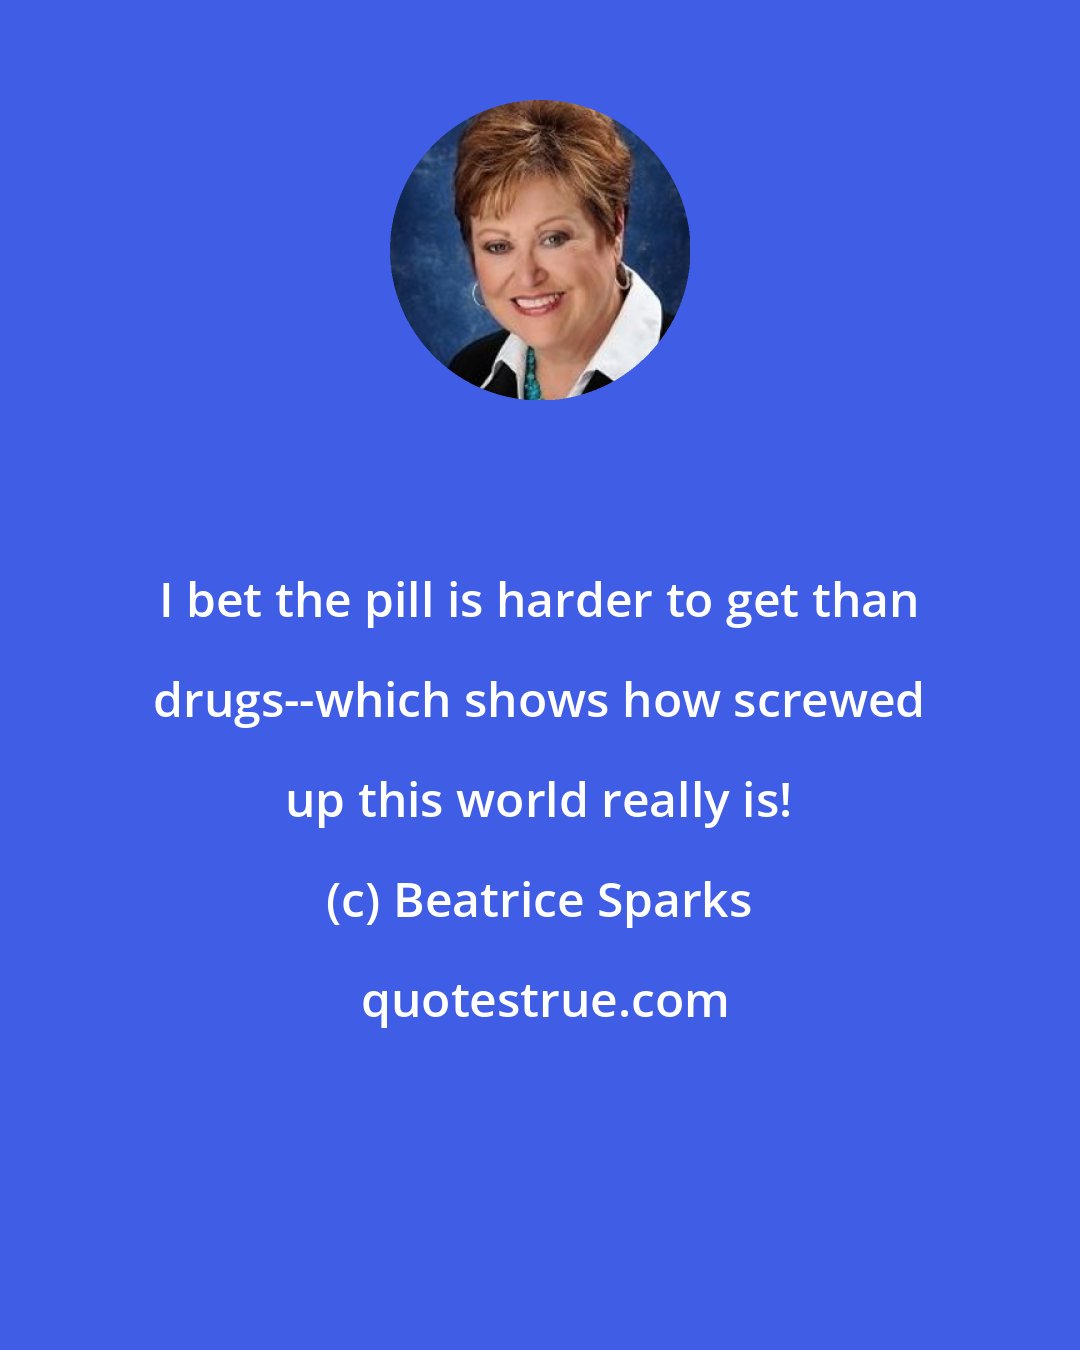 Beatrice Sparks: I bet the pill is harder to get than drugs--which shows how screwed up this world really is!